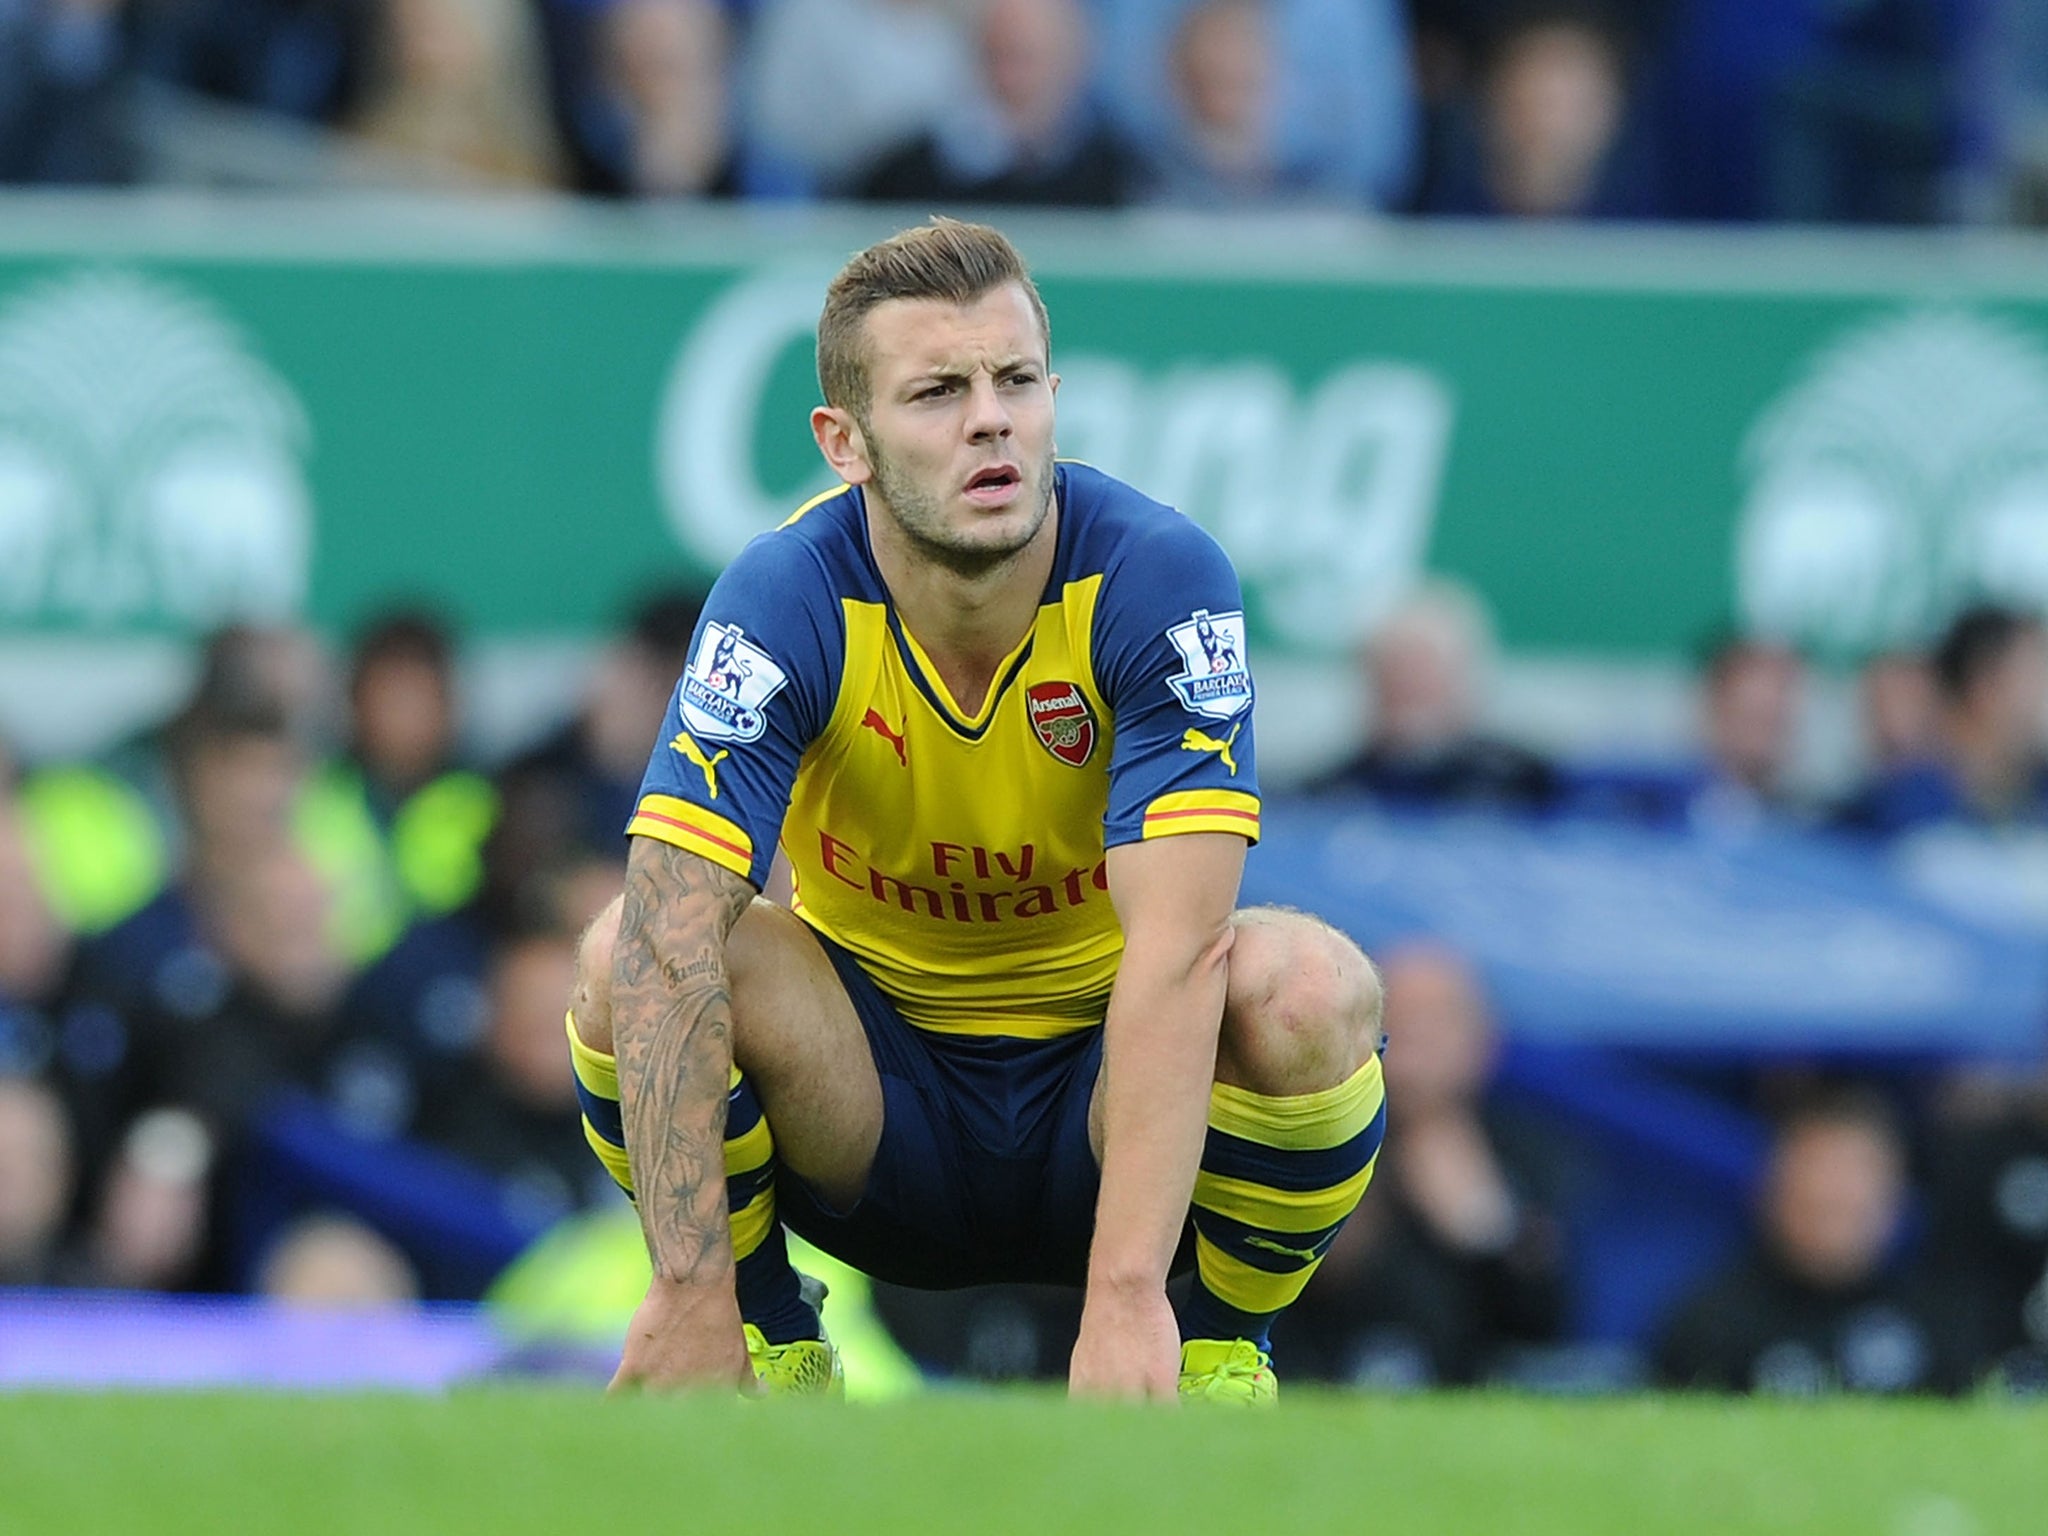 Arsenal midfielder Jack Wilshere pictured in the 2-2 draw with Everton